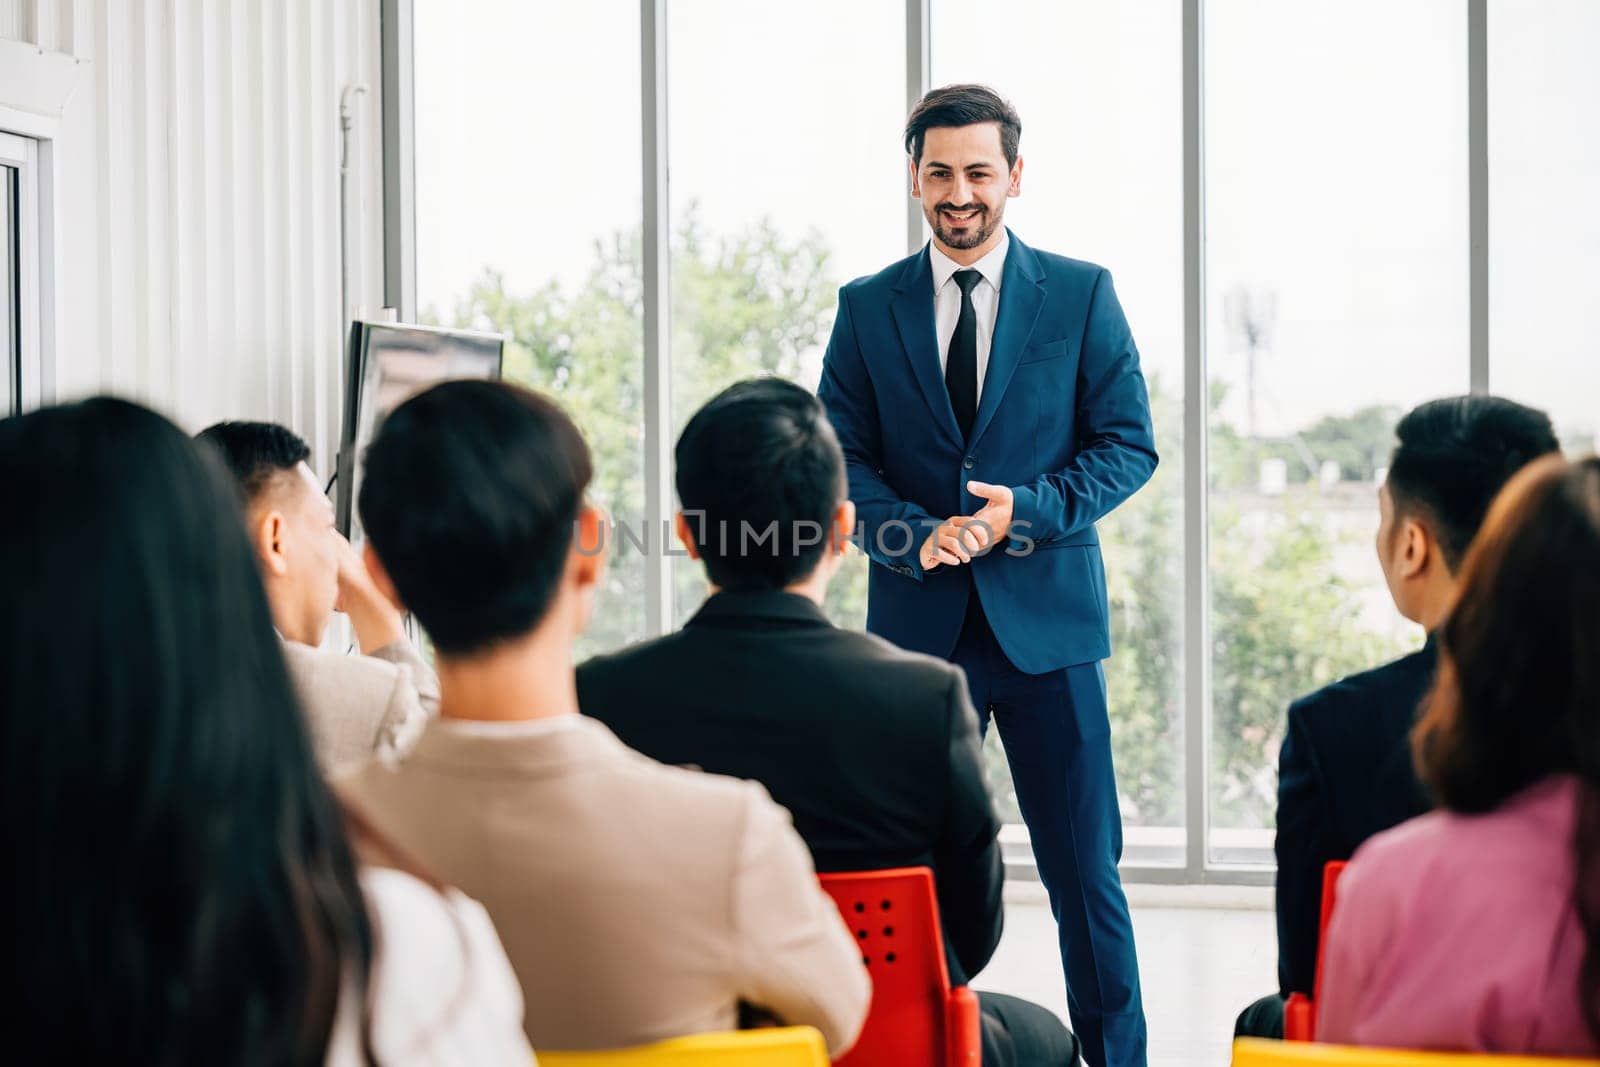 Business leaders present reviews in a meeting room, surrounded by a diverse group of colleagues actively listening. This embodies the concept of successful teamwork and collaboration.